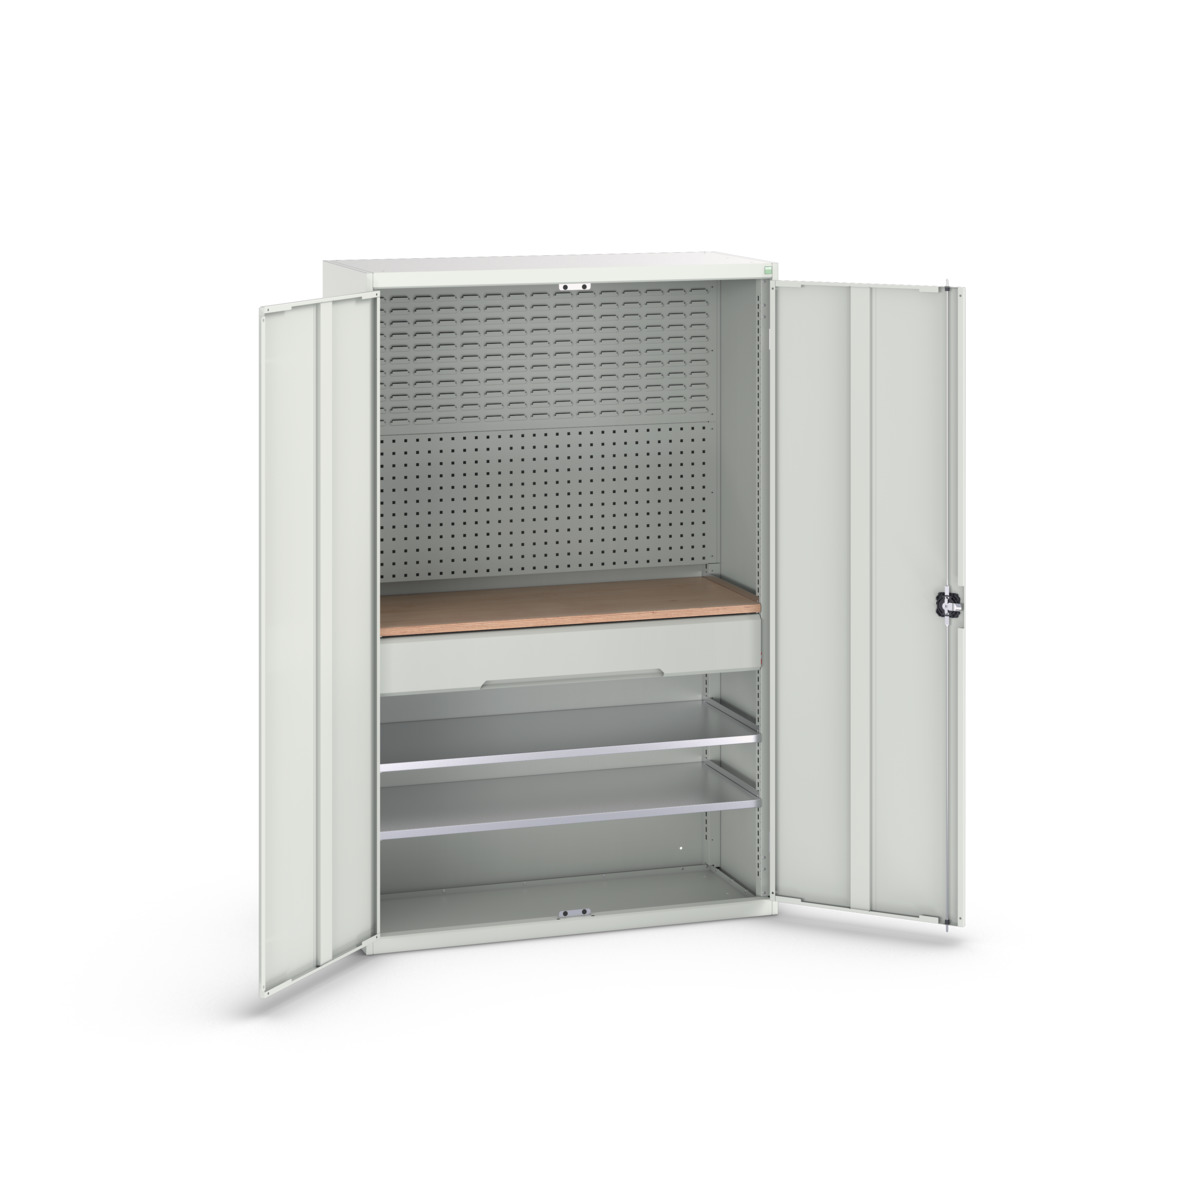 16926592.16 - verso kitted cupboard